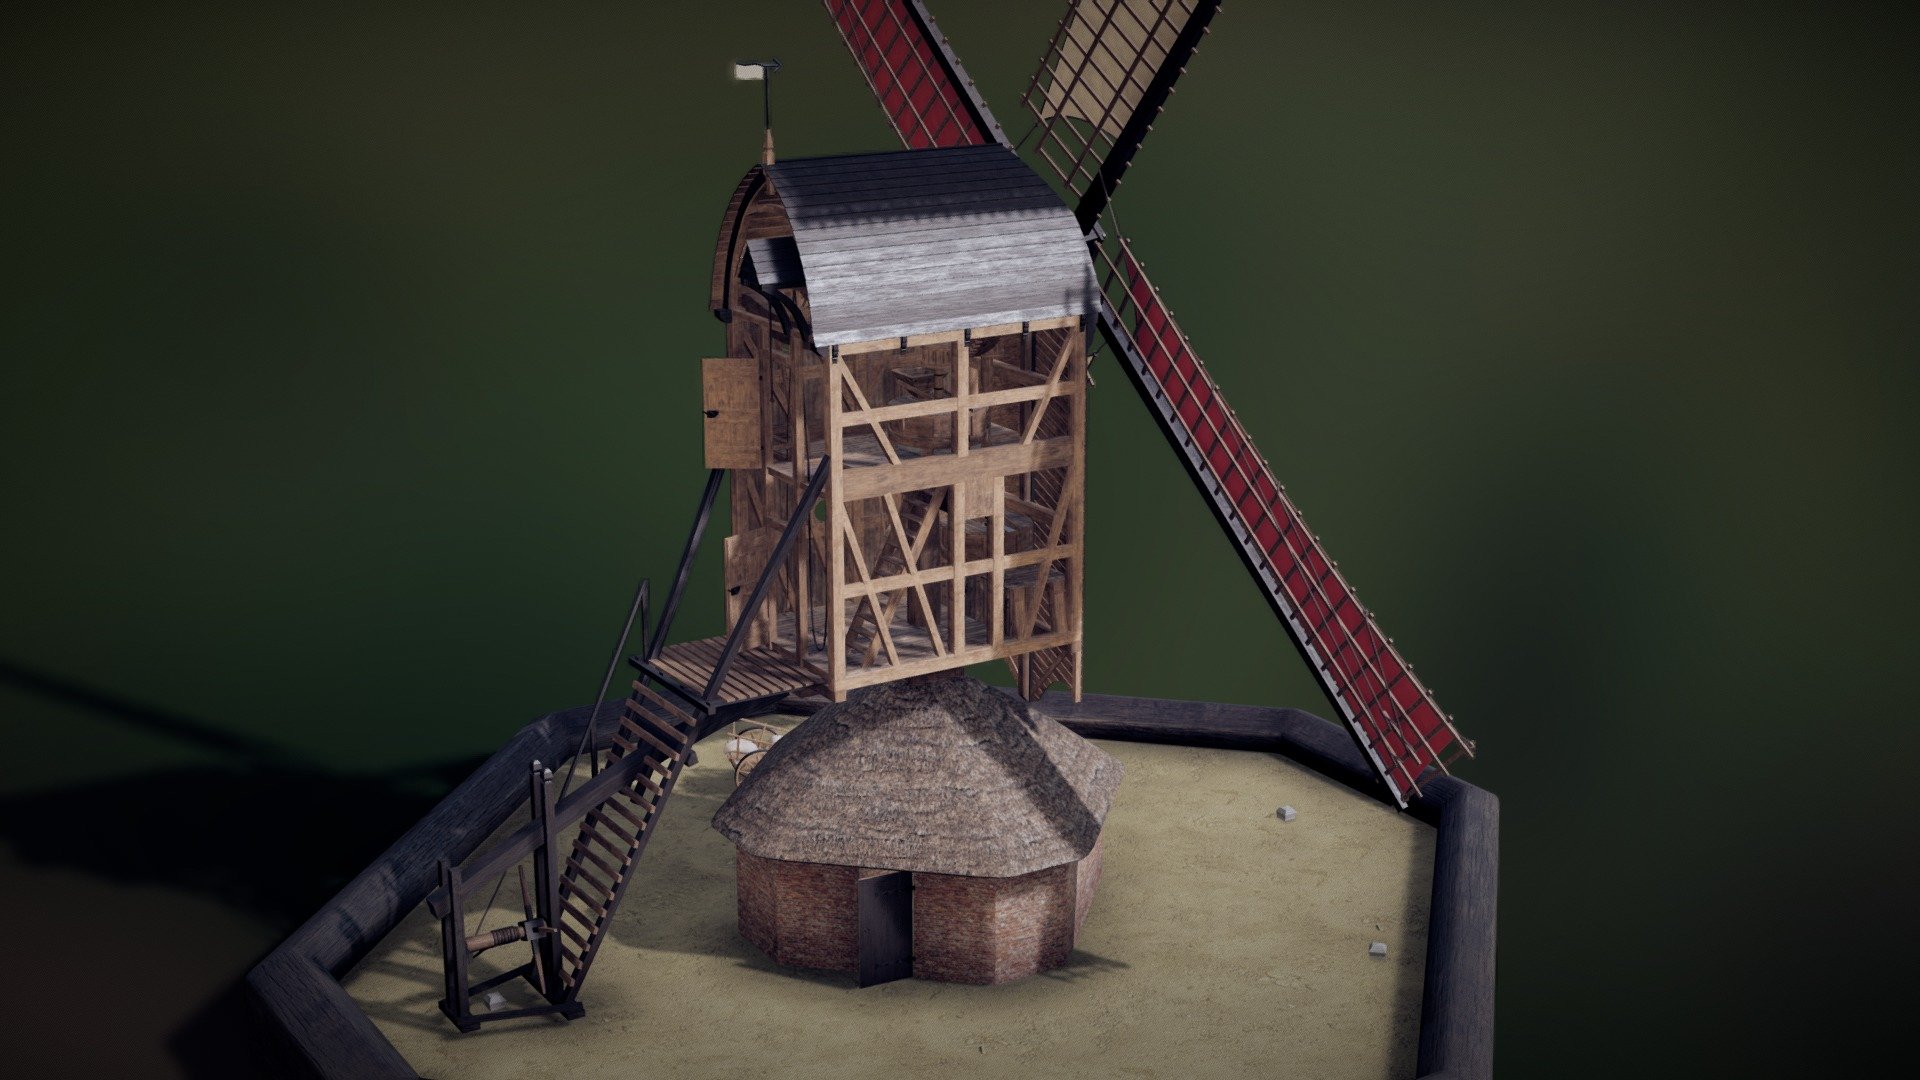 Dutch windmill reconstruction of a grainmill that stood on the citywalls of Leiden. In the 17th century, most automatic production was done by wind power. Windmills like these would probably work day and night with a good wind to get most production done.



This type is called a Standerd-mill, because it stands on a large stand. You are still able to find windmills like these in the Netherlands. Some of which have been renovated and are working again 3d model